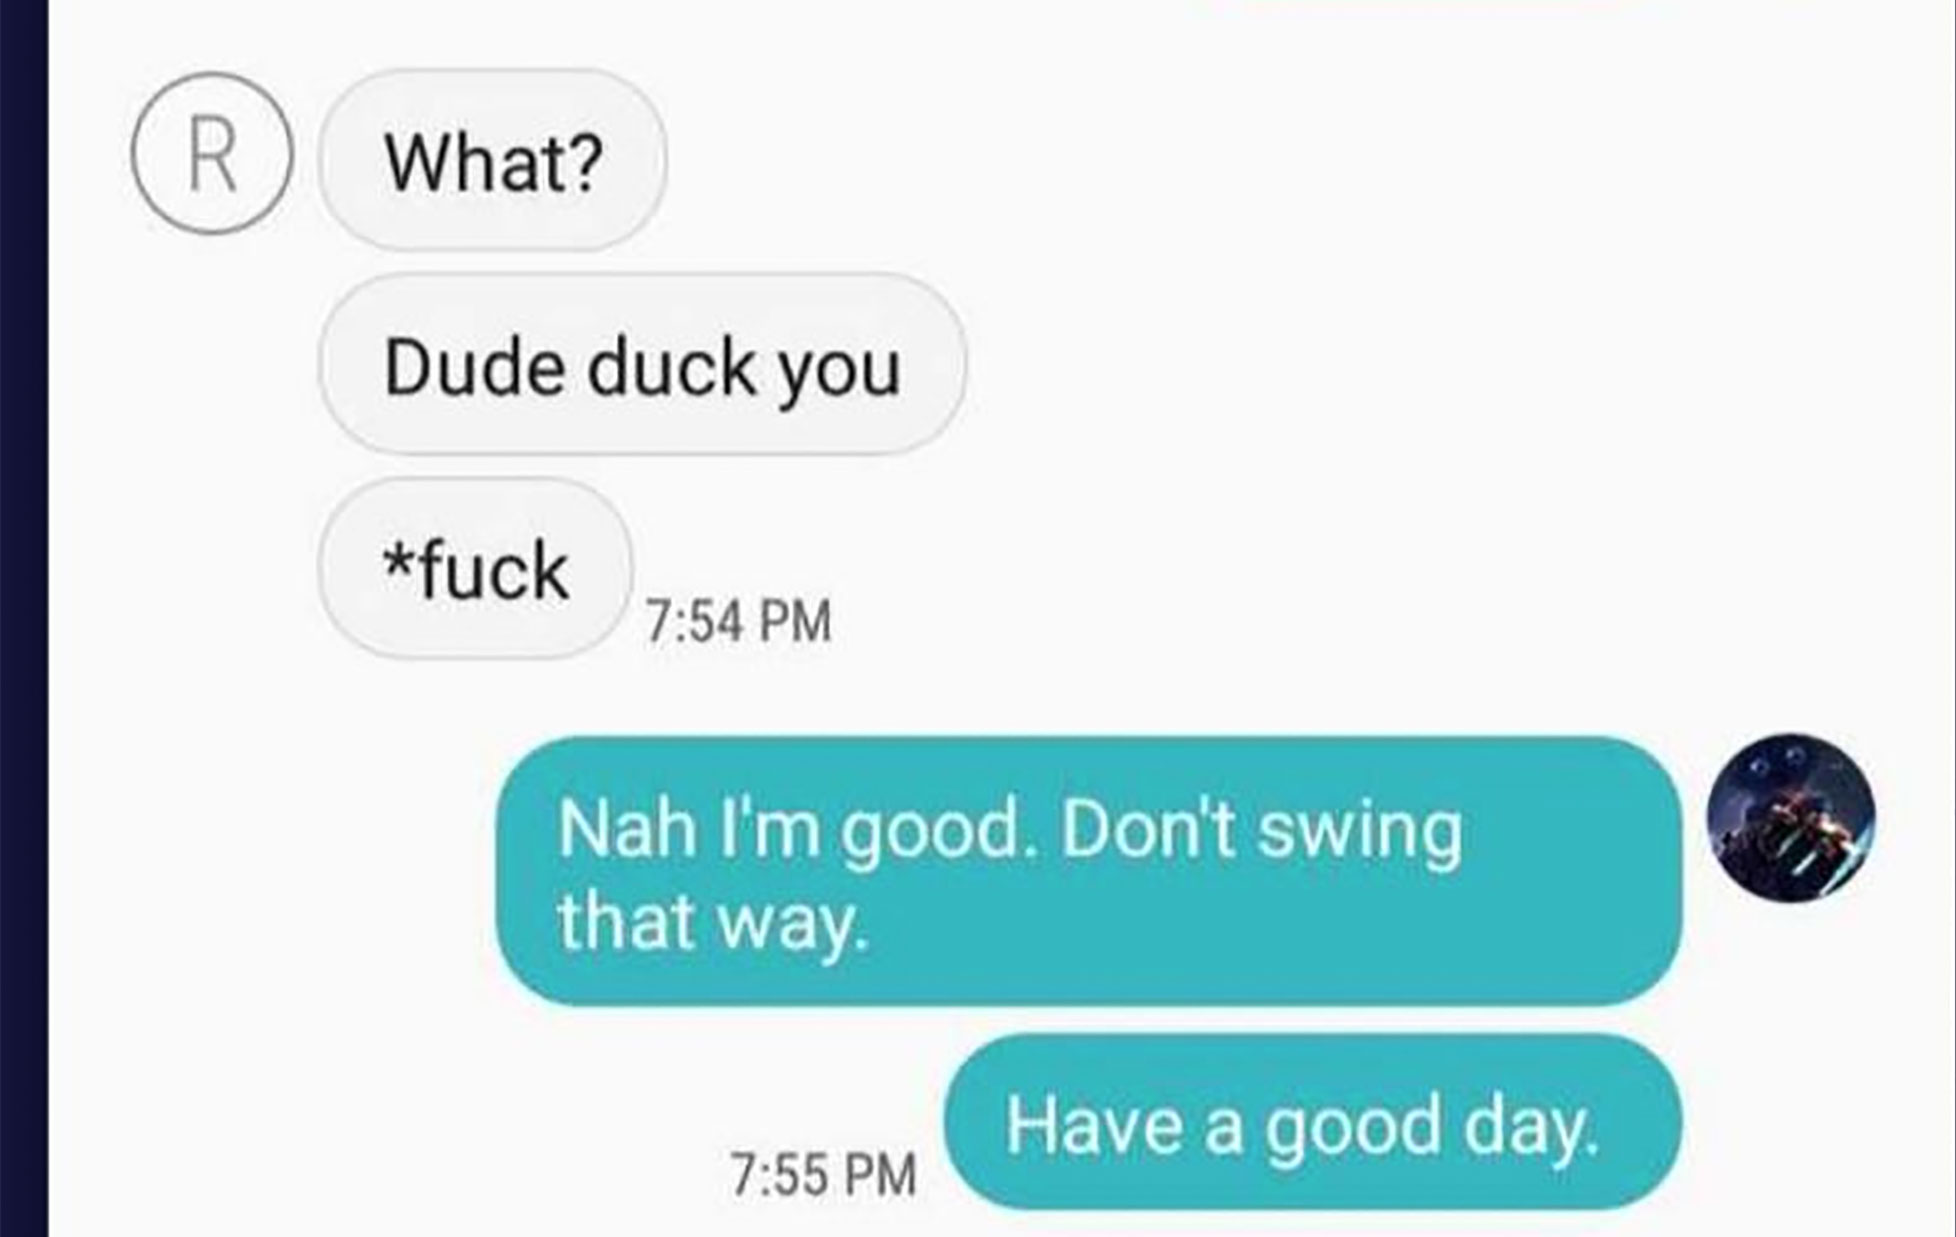 hate my self - What? Dude duck you fuck Nah I'm good. Don't swing that way. Have a good day.